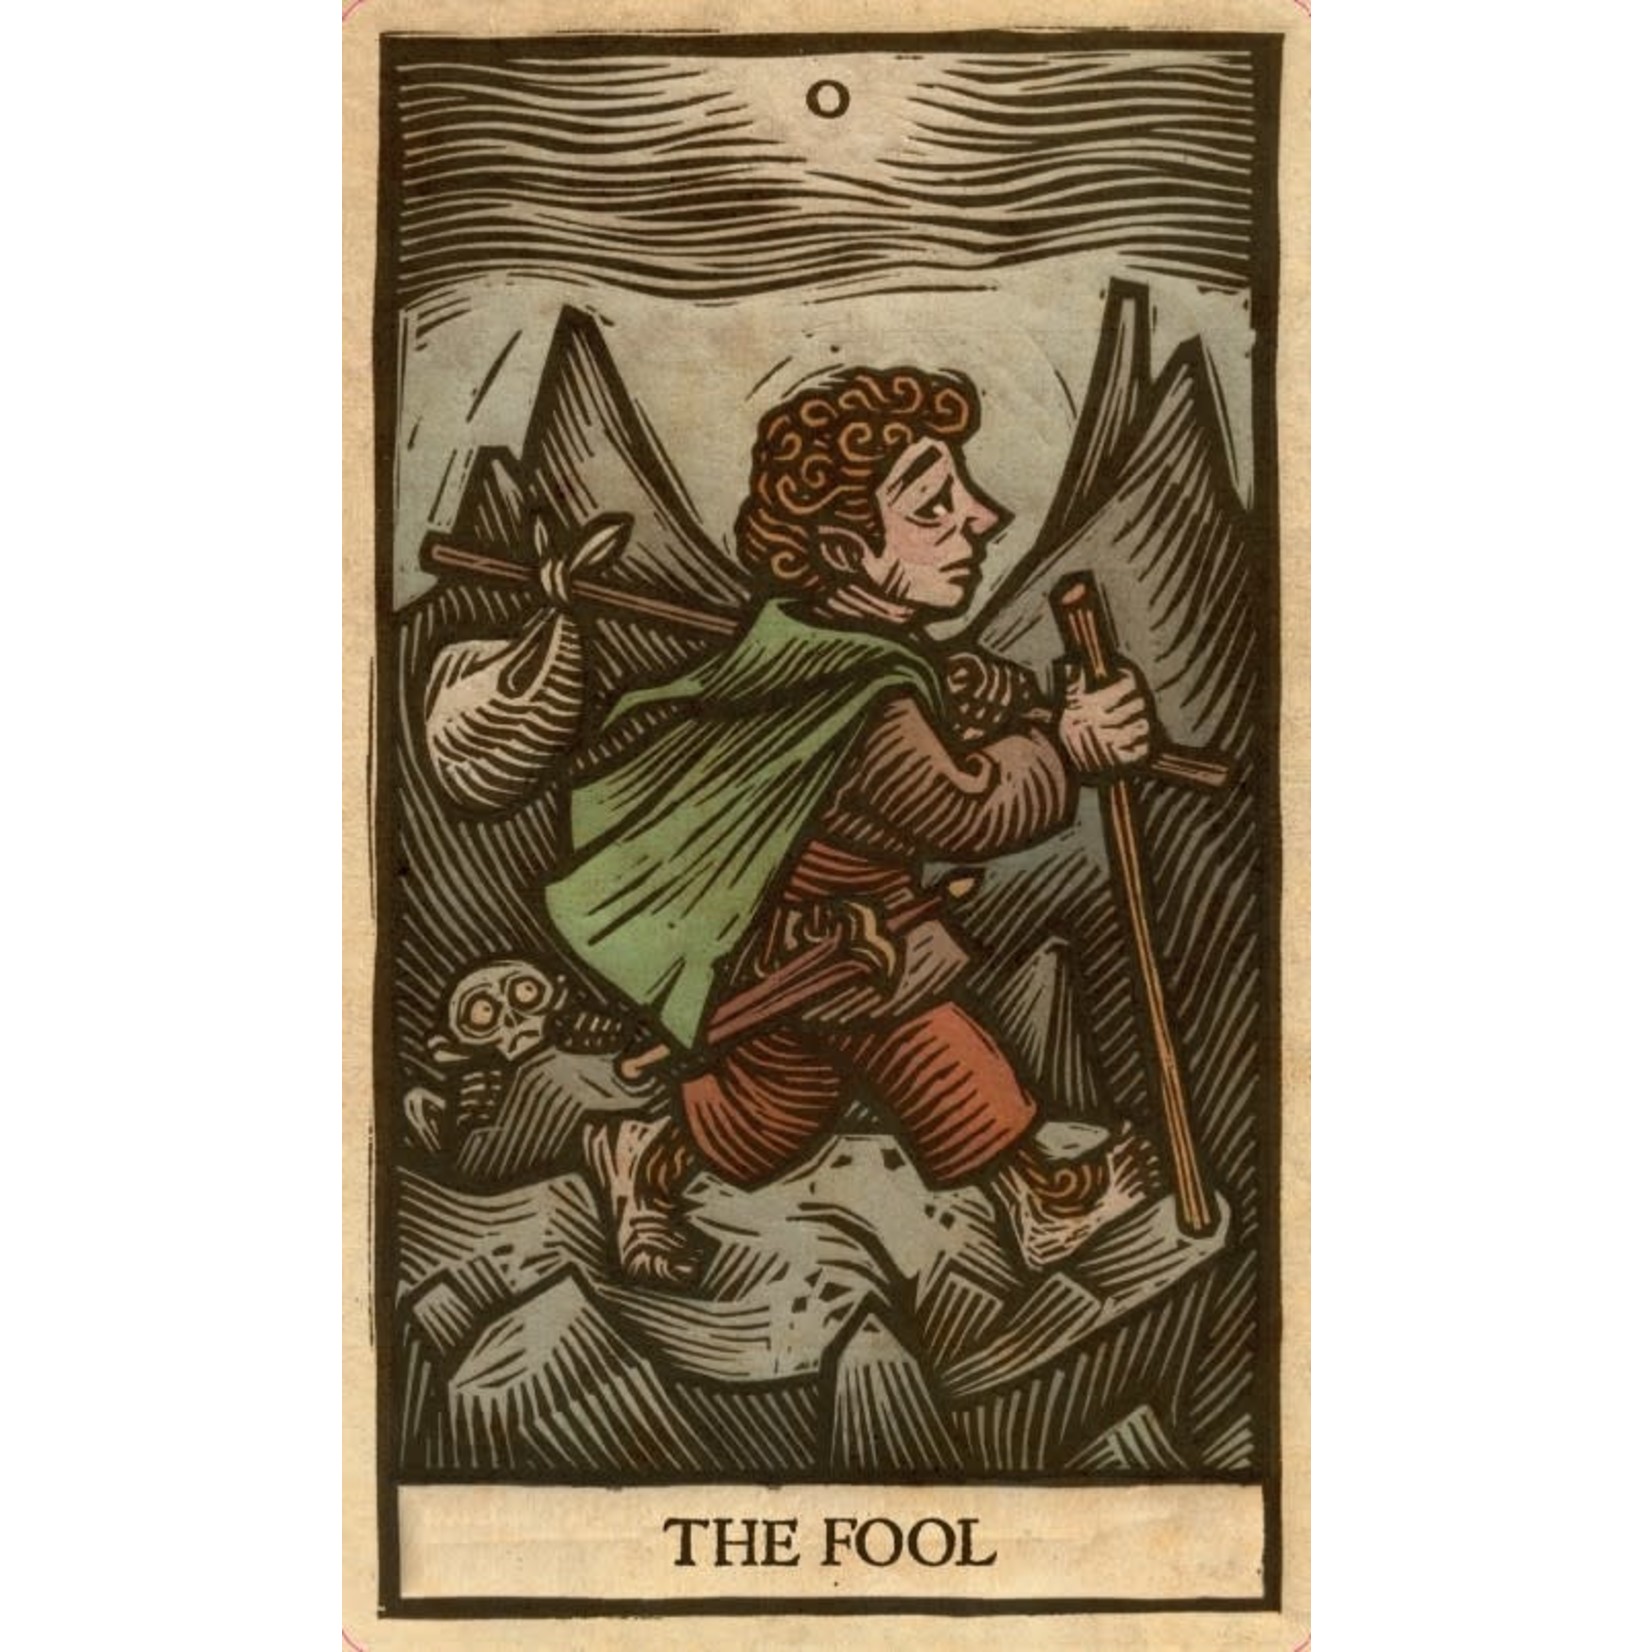 Insight Editions The Lord of the Rings Tarot Deck & Guide